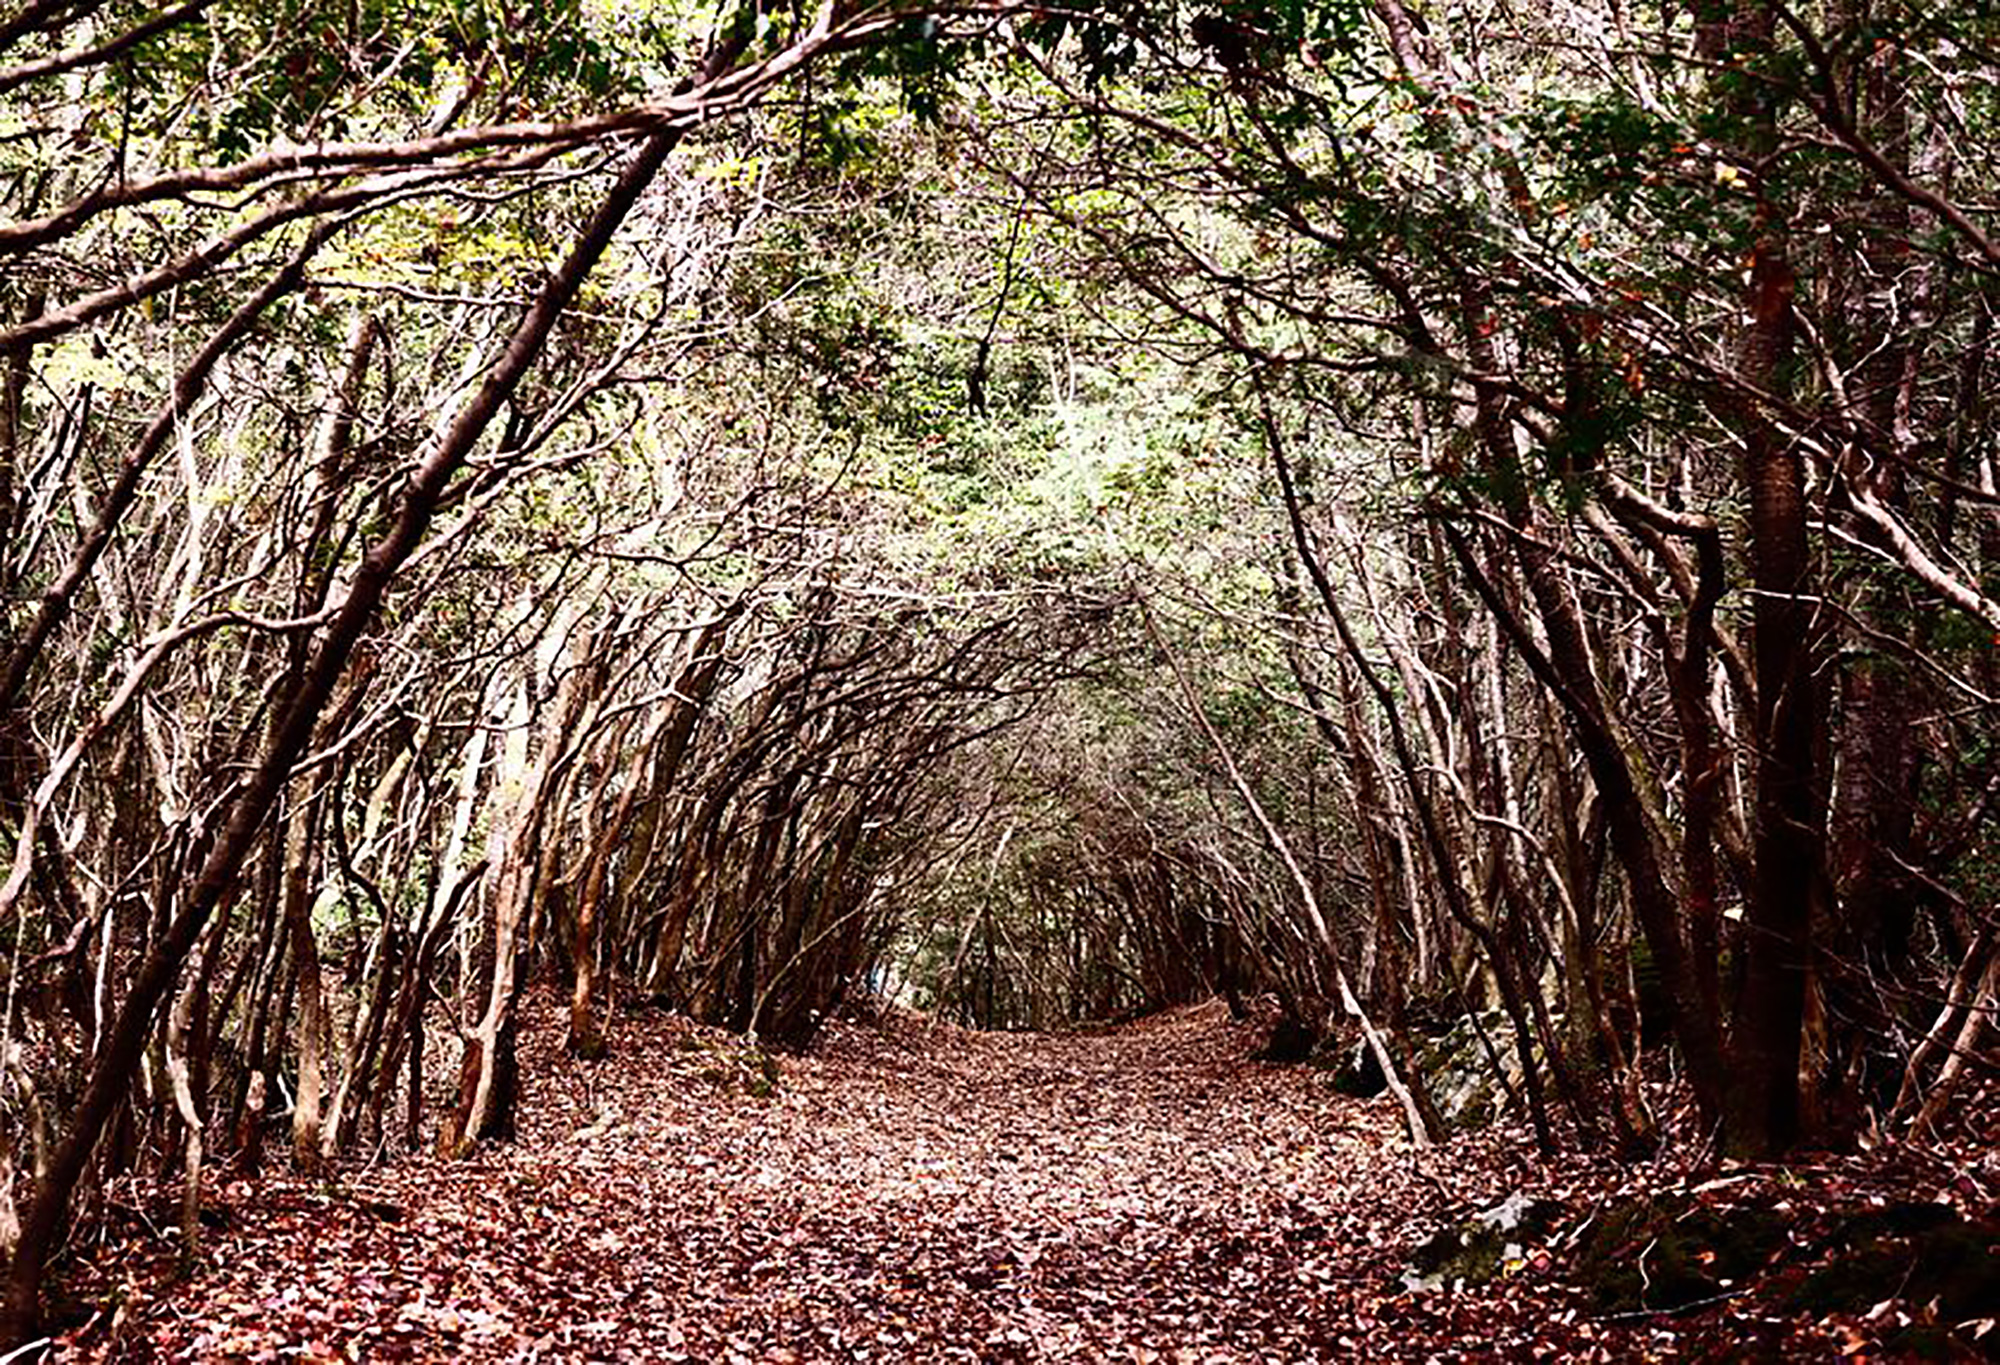 Aokigahara Forest, Japan: looks innocent enough… or does it?